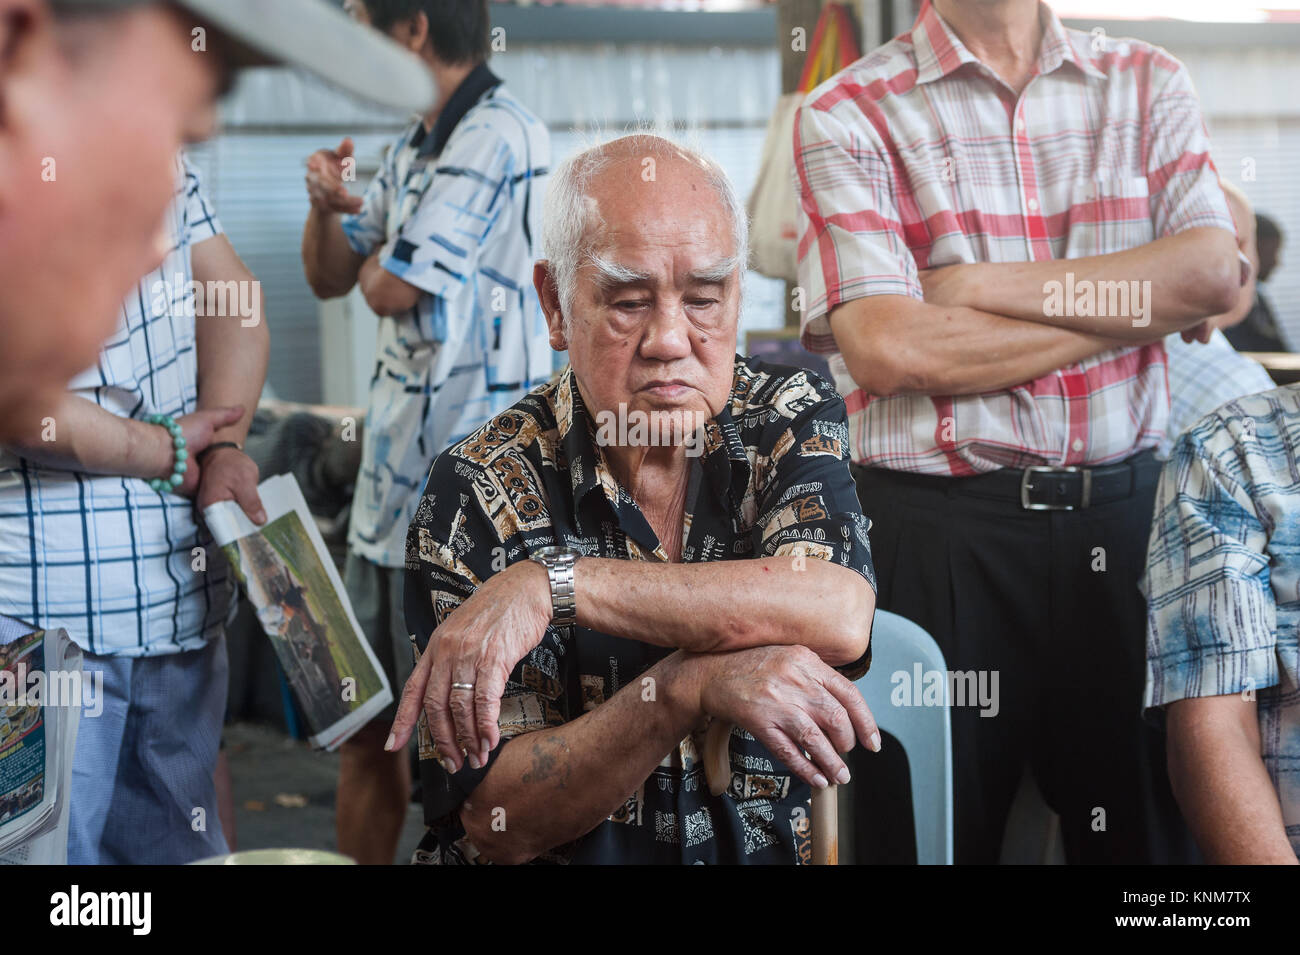 19.11.2017, Singapore, Republic of Singapore, Asia - Elderly men follow a game of Chinese Chess also known as Xiangqi at the Kreta Ayer Square. Stock Photo